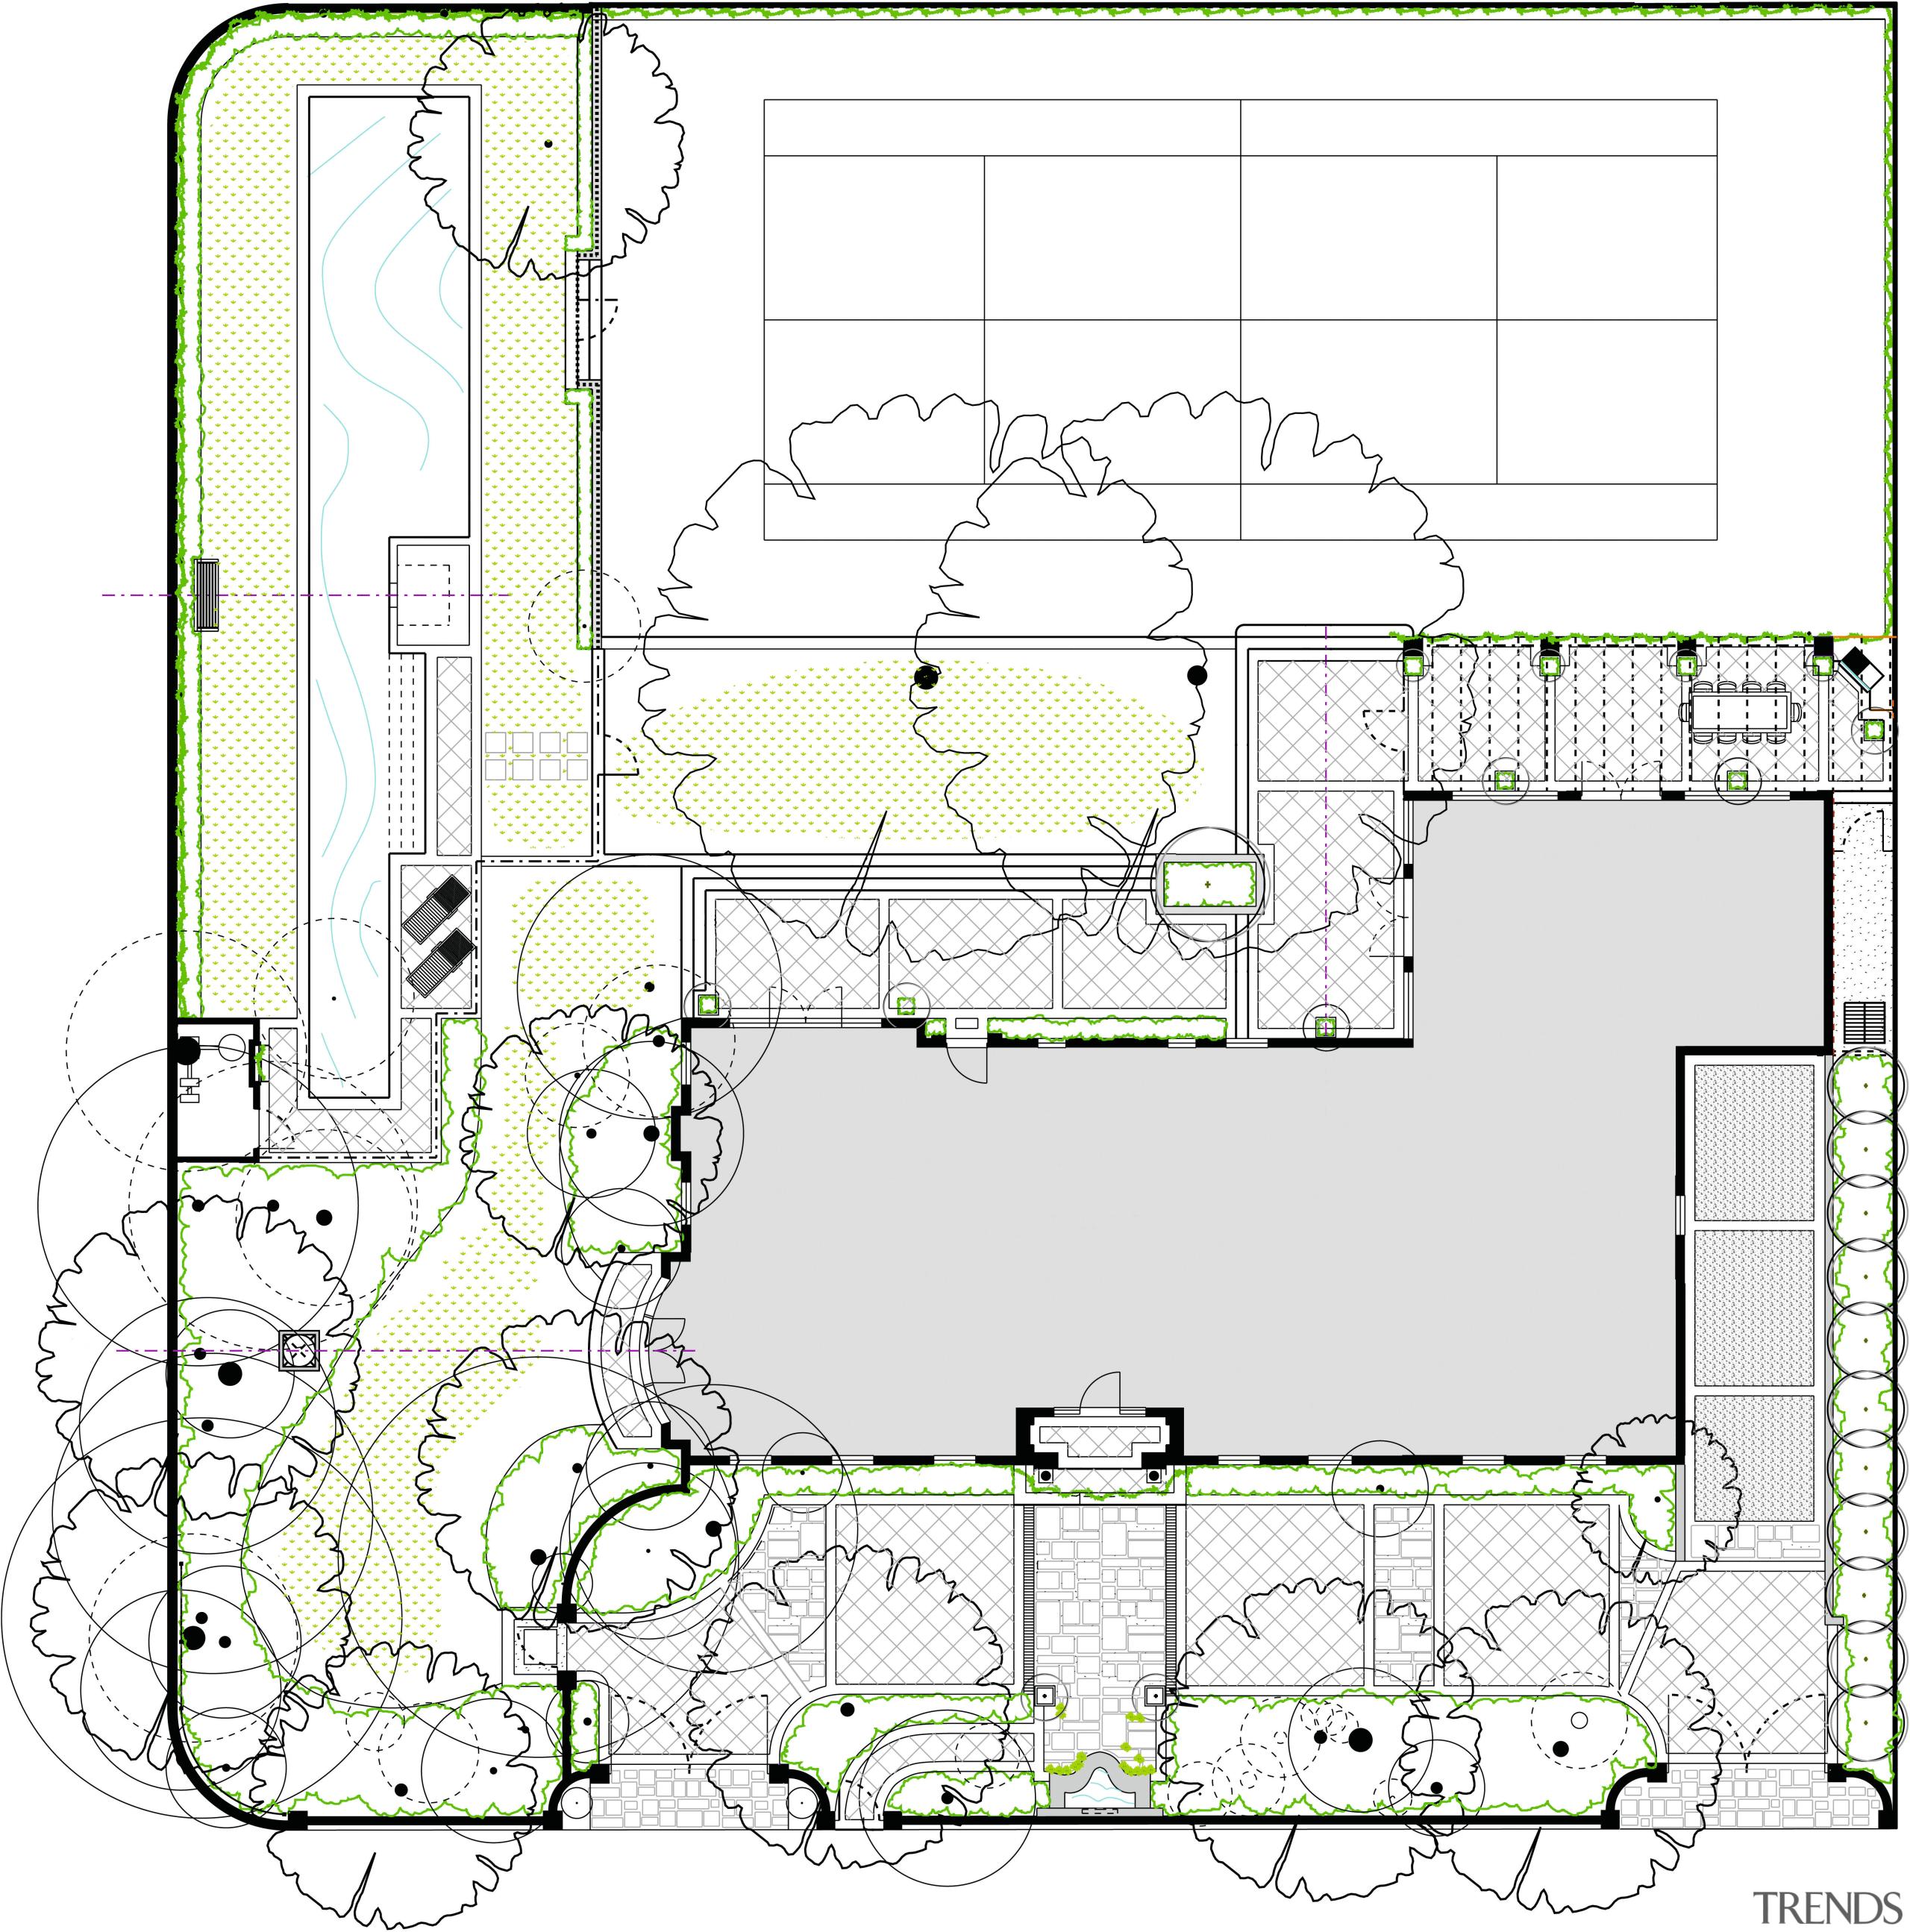 Plan view of the property showing the house area, design, diagram, drawing, floor plan, land lot, line, plan, product design, technical drawing, white